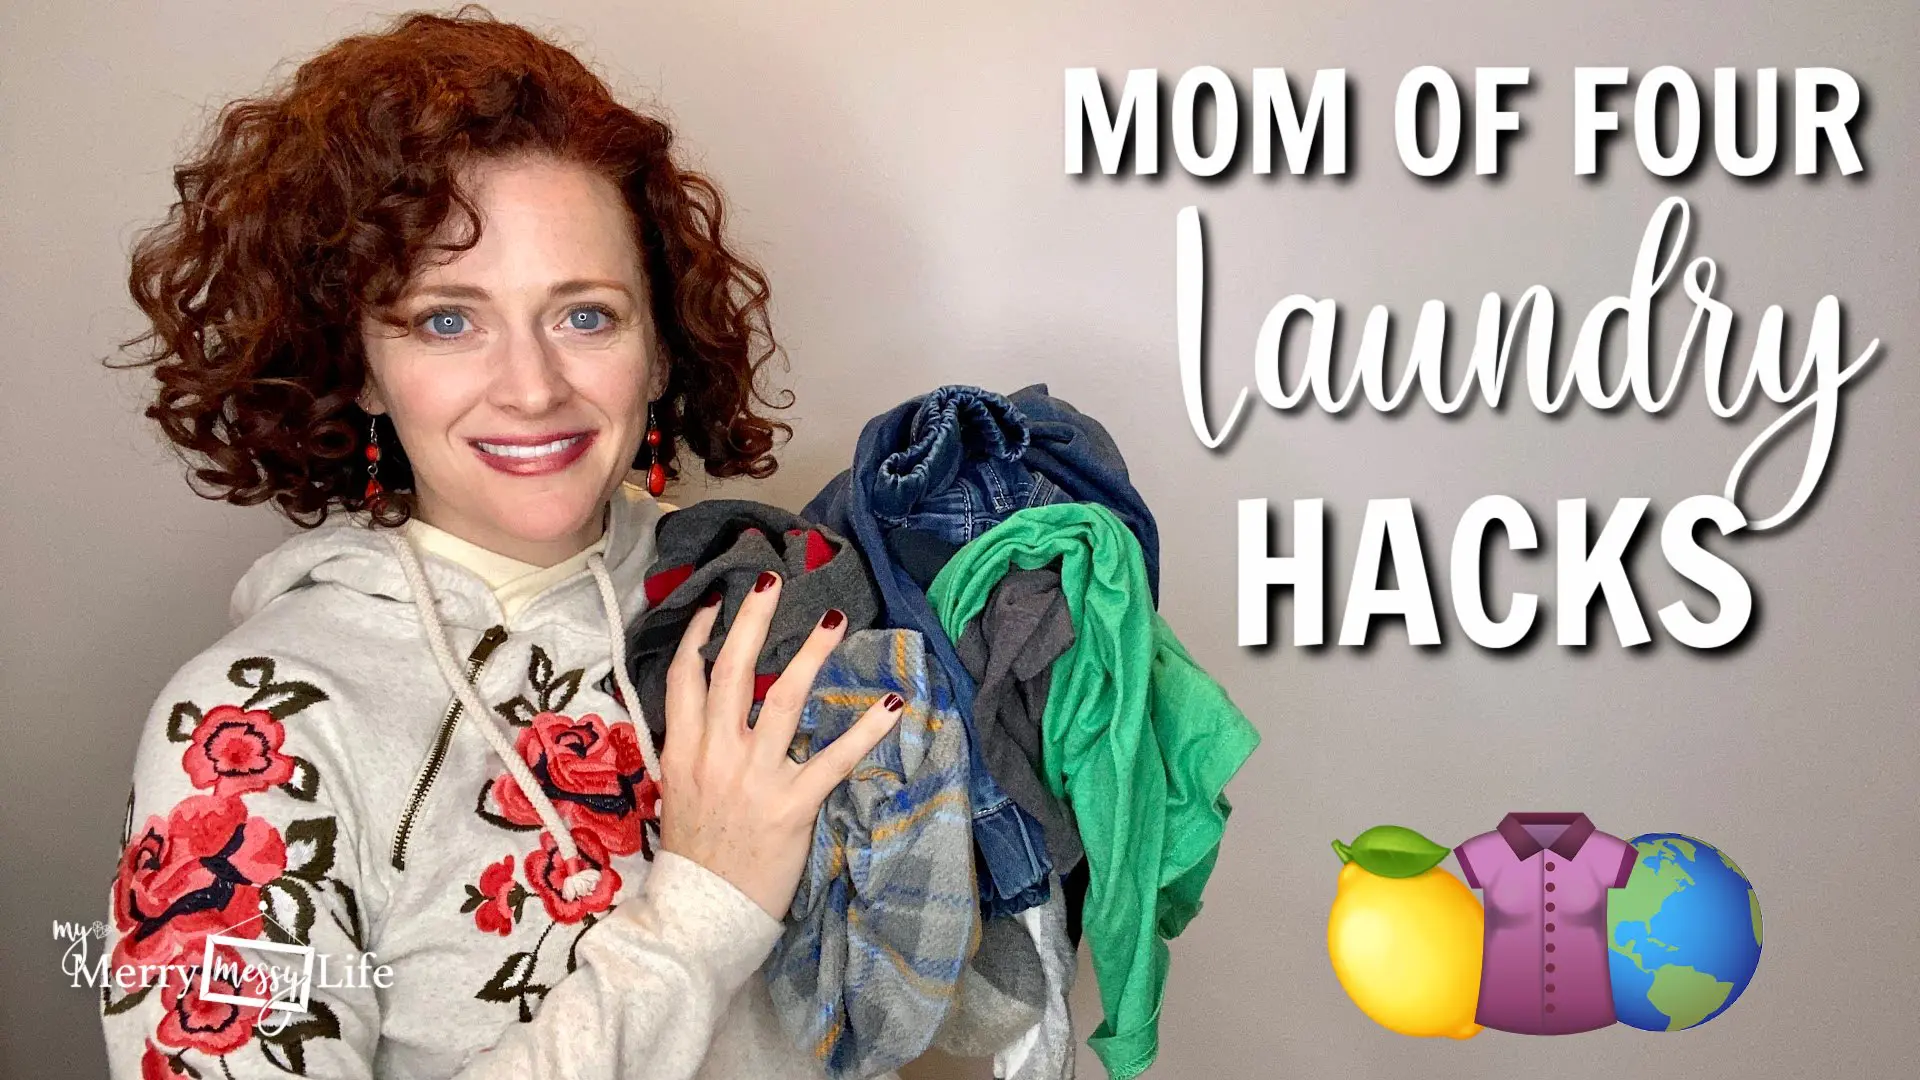 Laundry Hacks for Busy Moms and Families - from a mom of four using the Flylady system